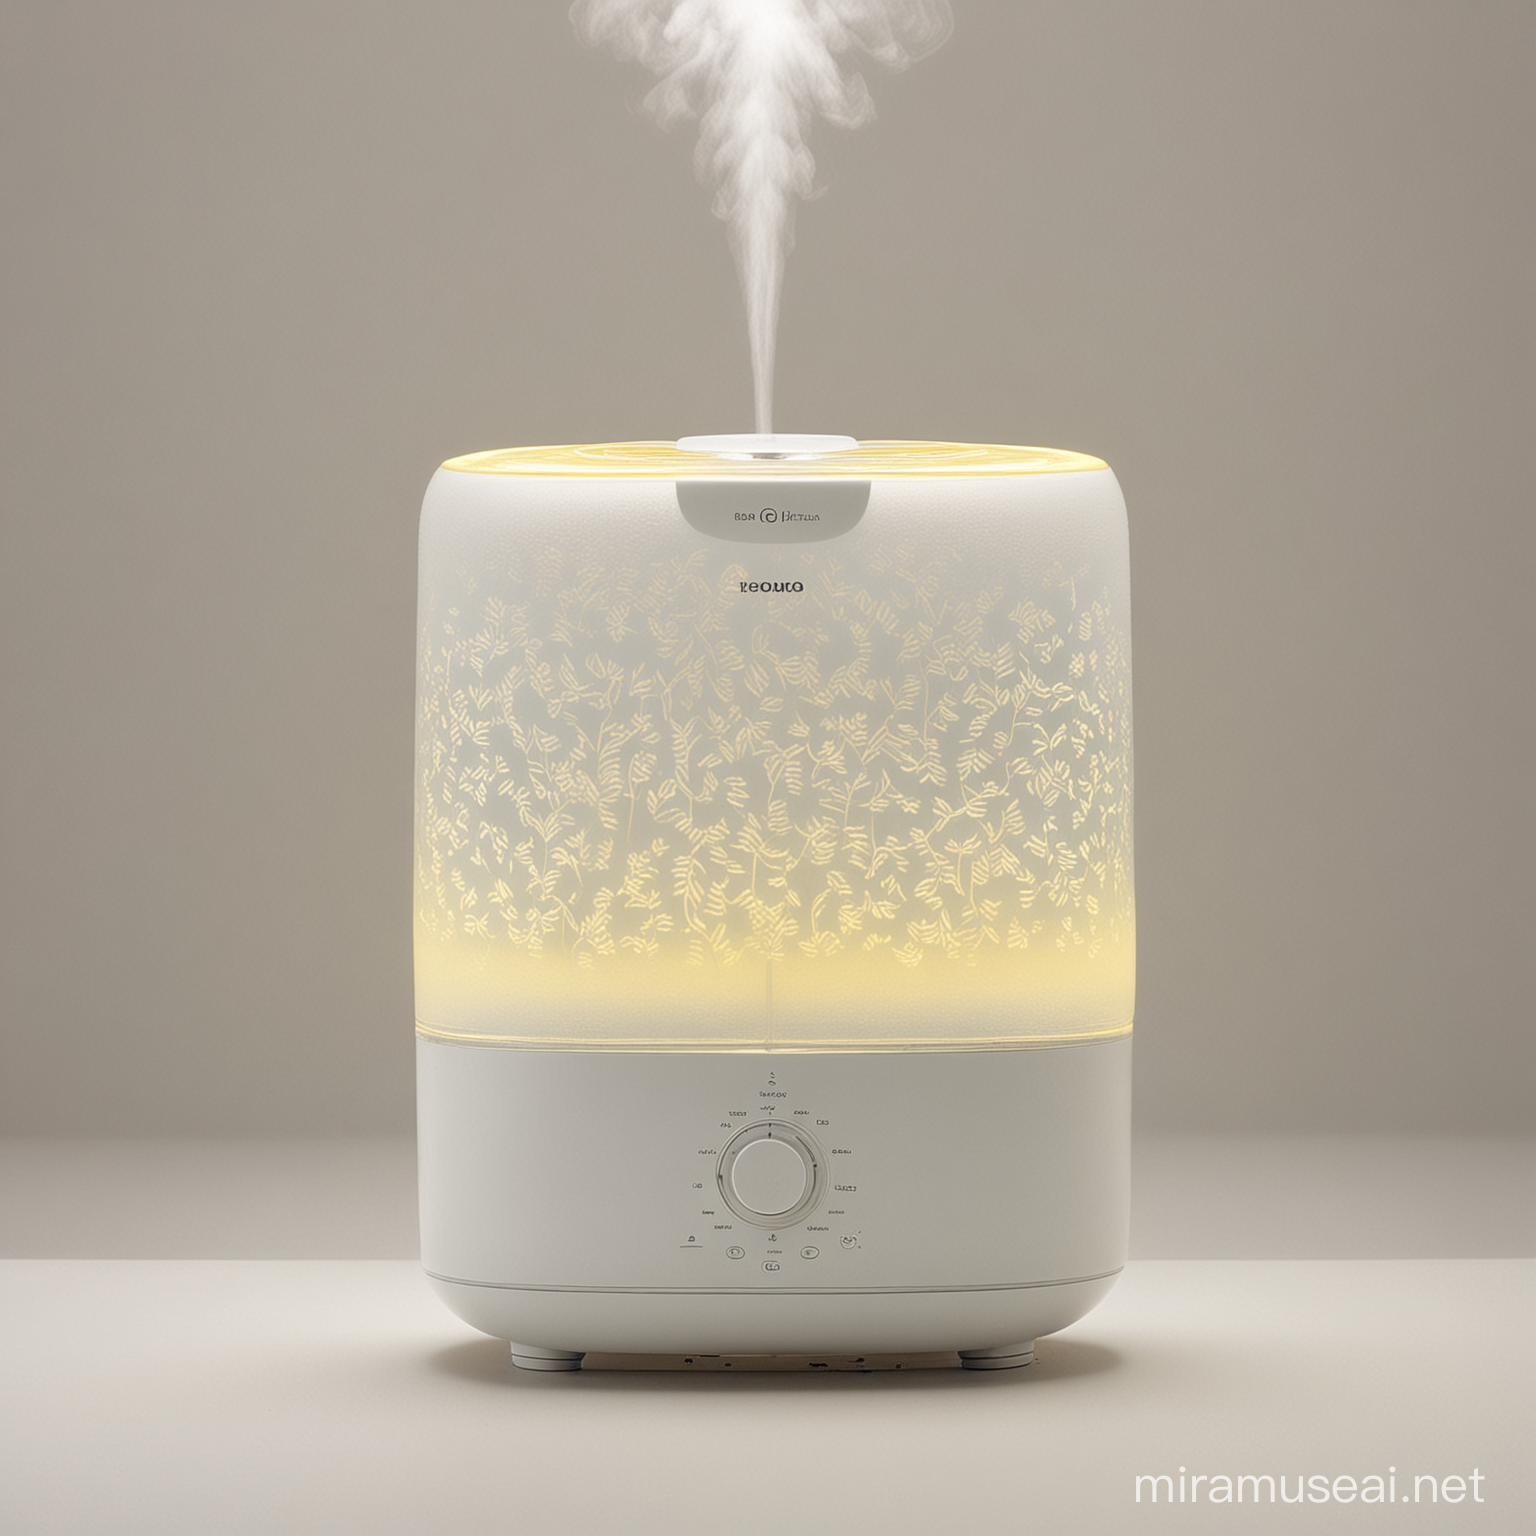 Transparent Middle with Soft Yellow Light Strip in Humidifier